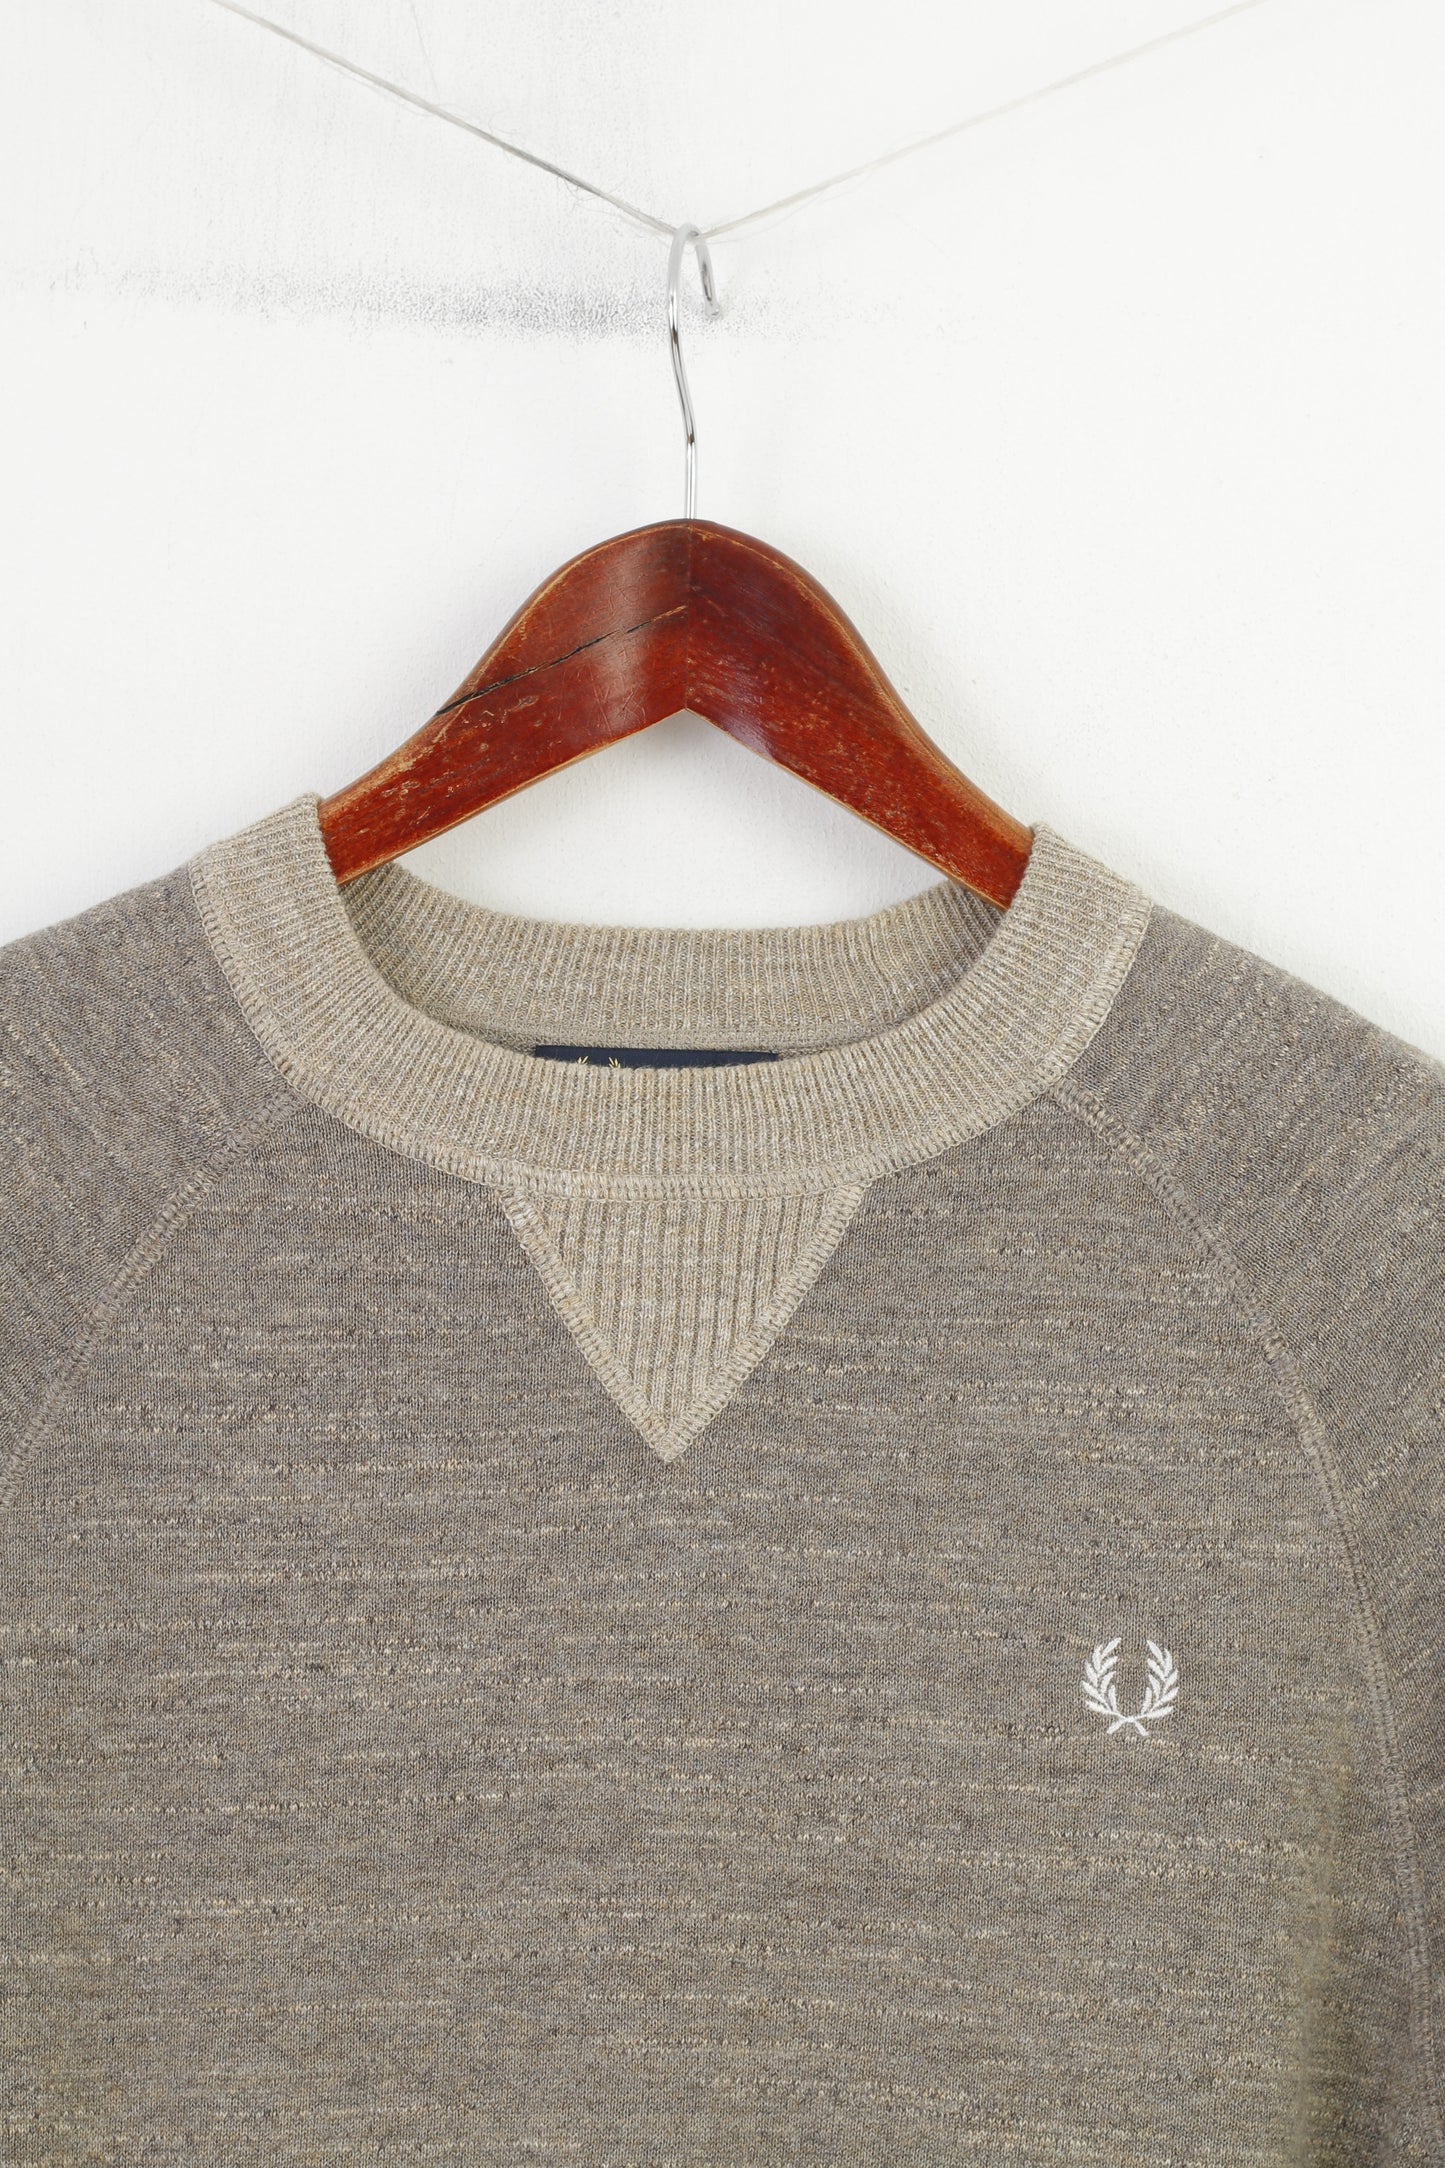 Fred Perry Men S Jumper Brown Crew Neck Logo Cotton Classic Vintage Sweater